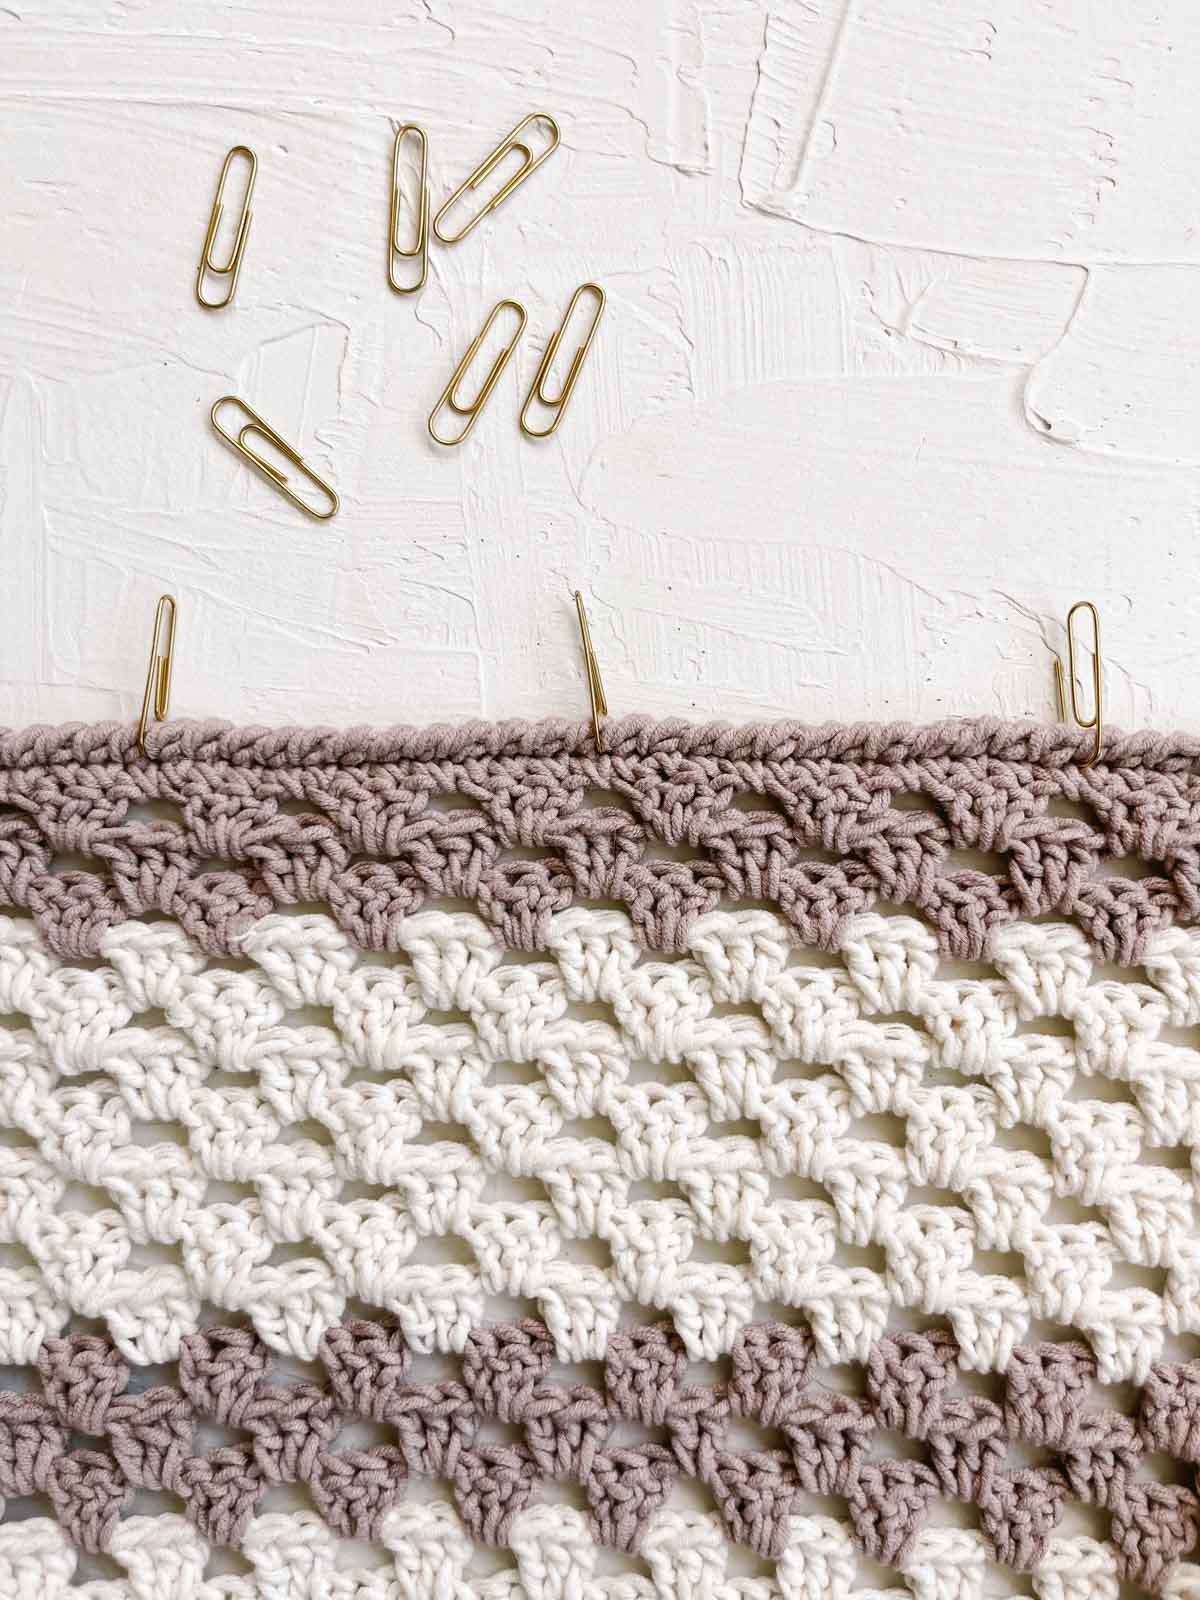 Gold paper clips used as stitch markers in a crochet sweater.